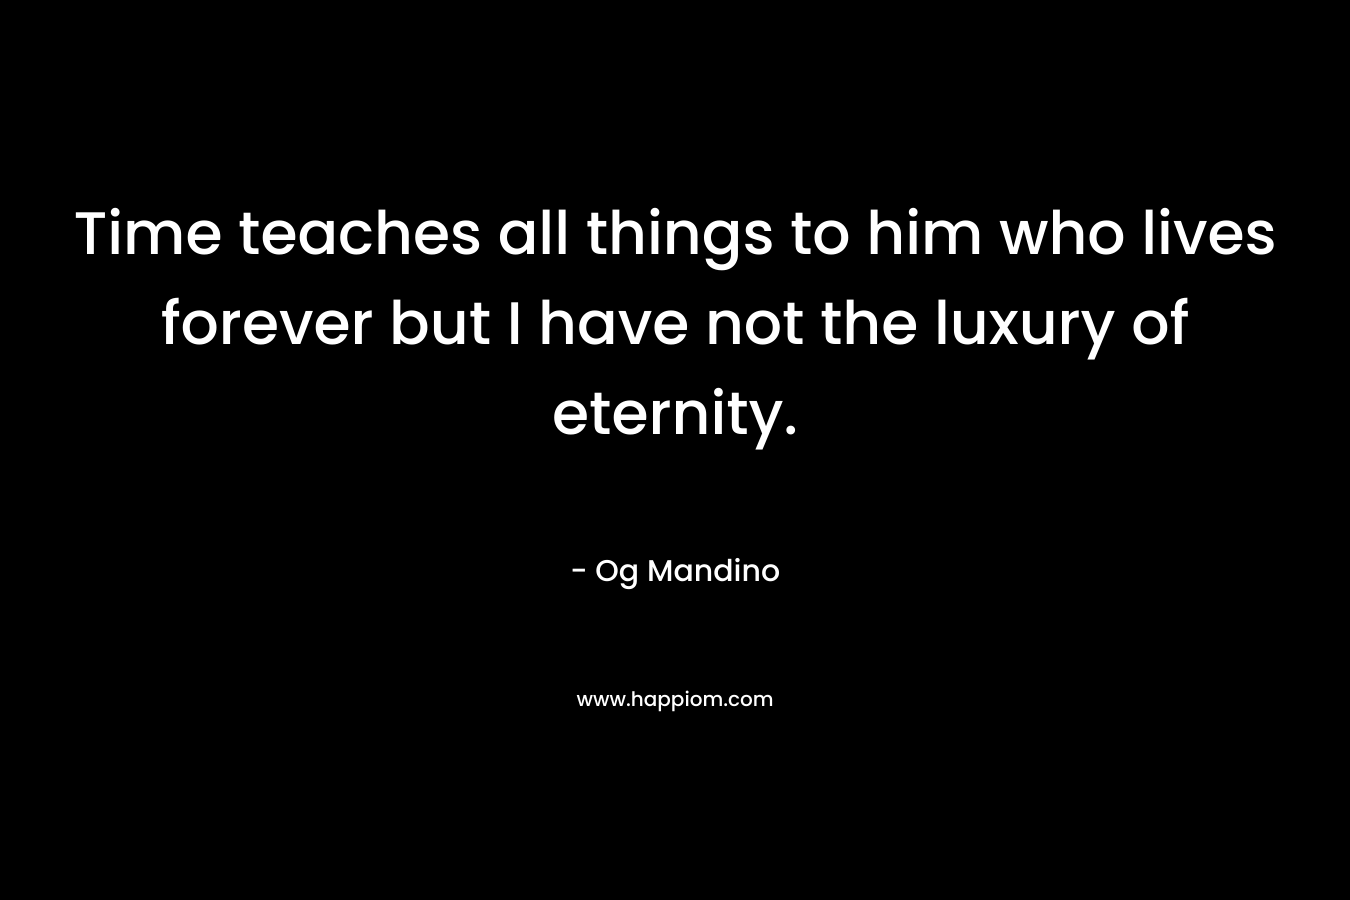 Time teaches all things to him who lives forever but I have not the luxury of eternity. – Og Mandino